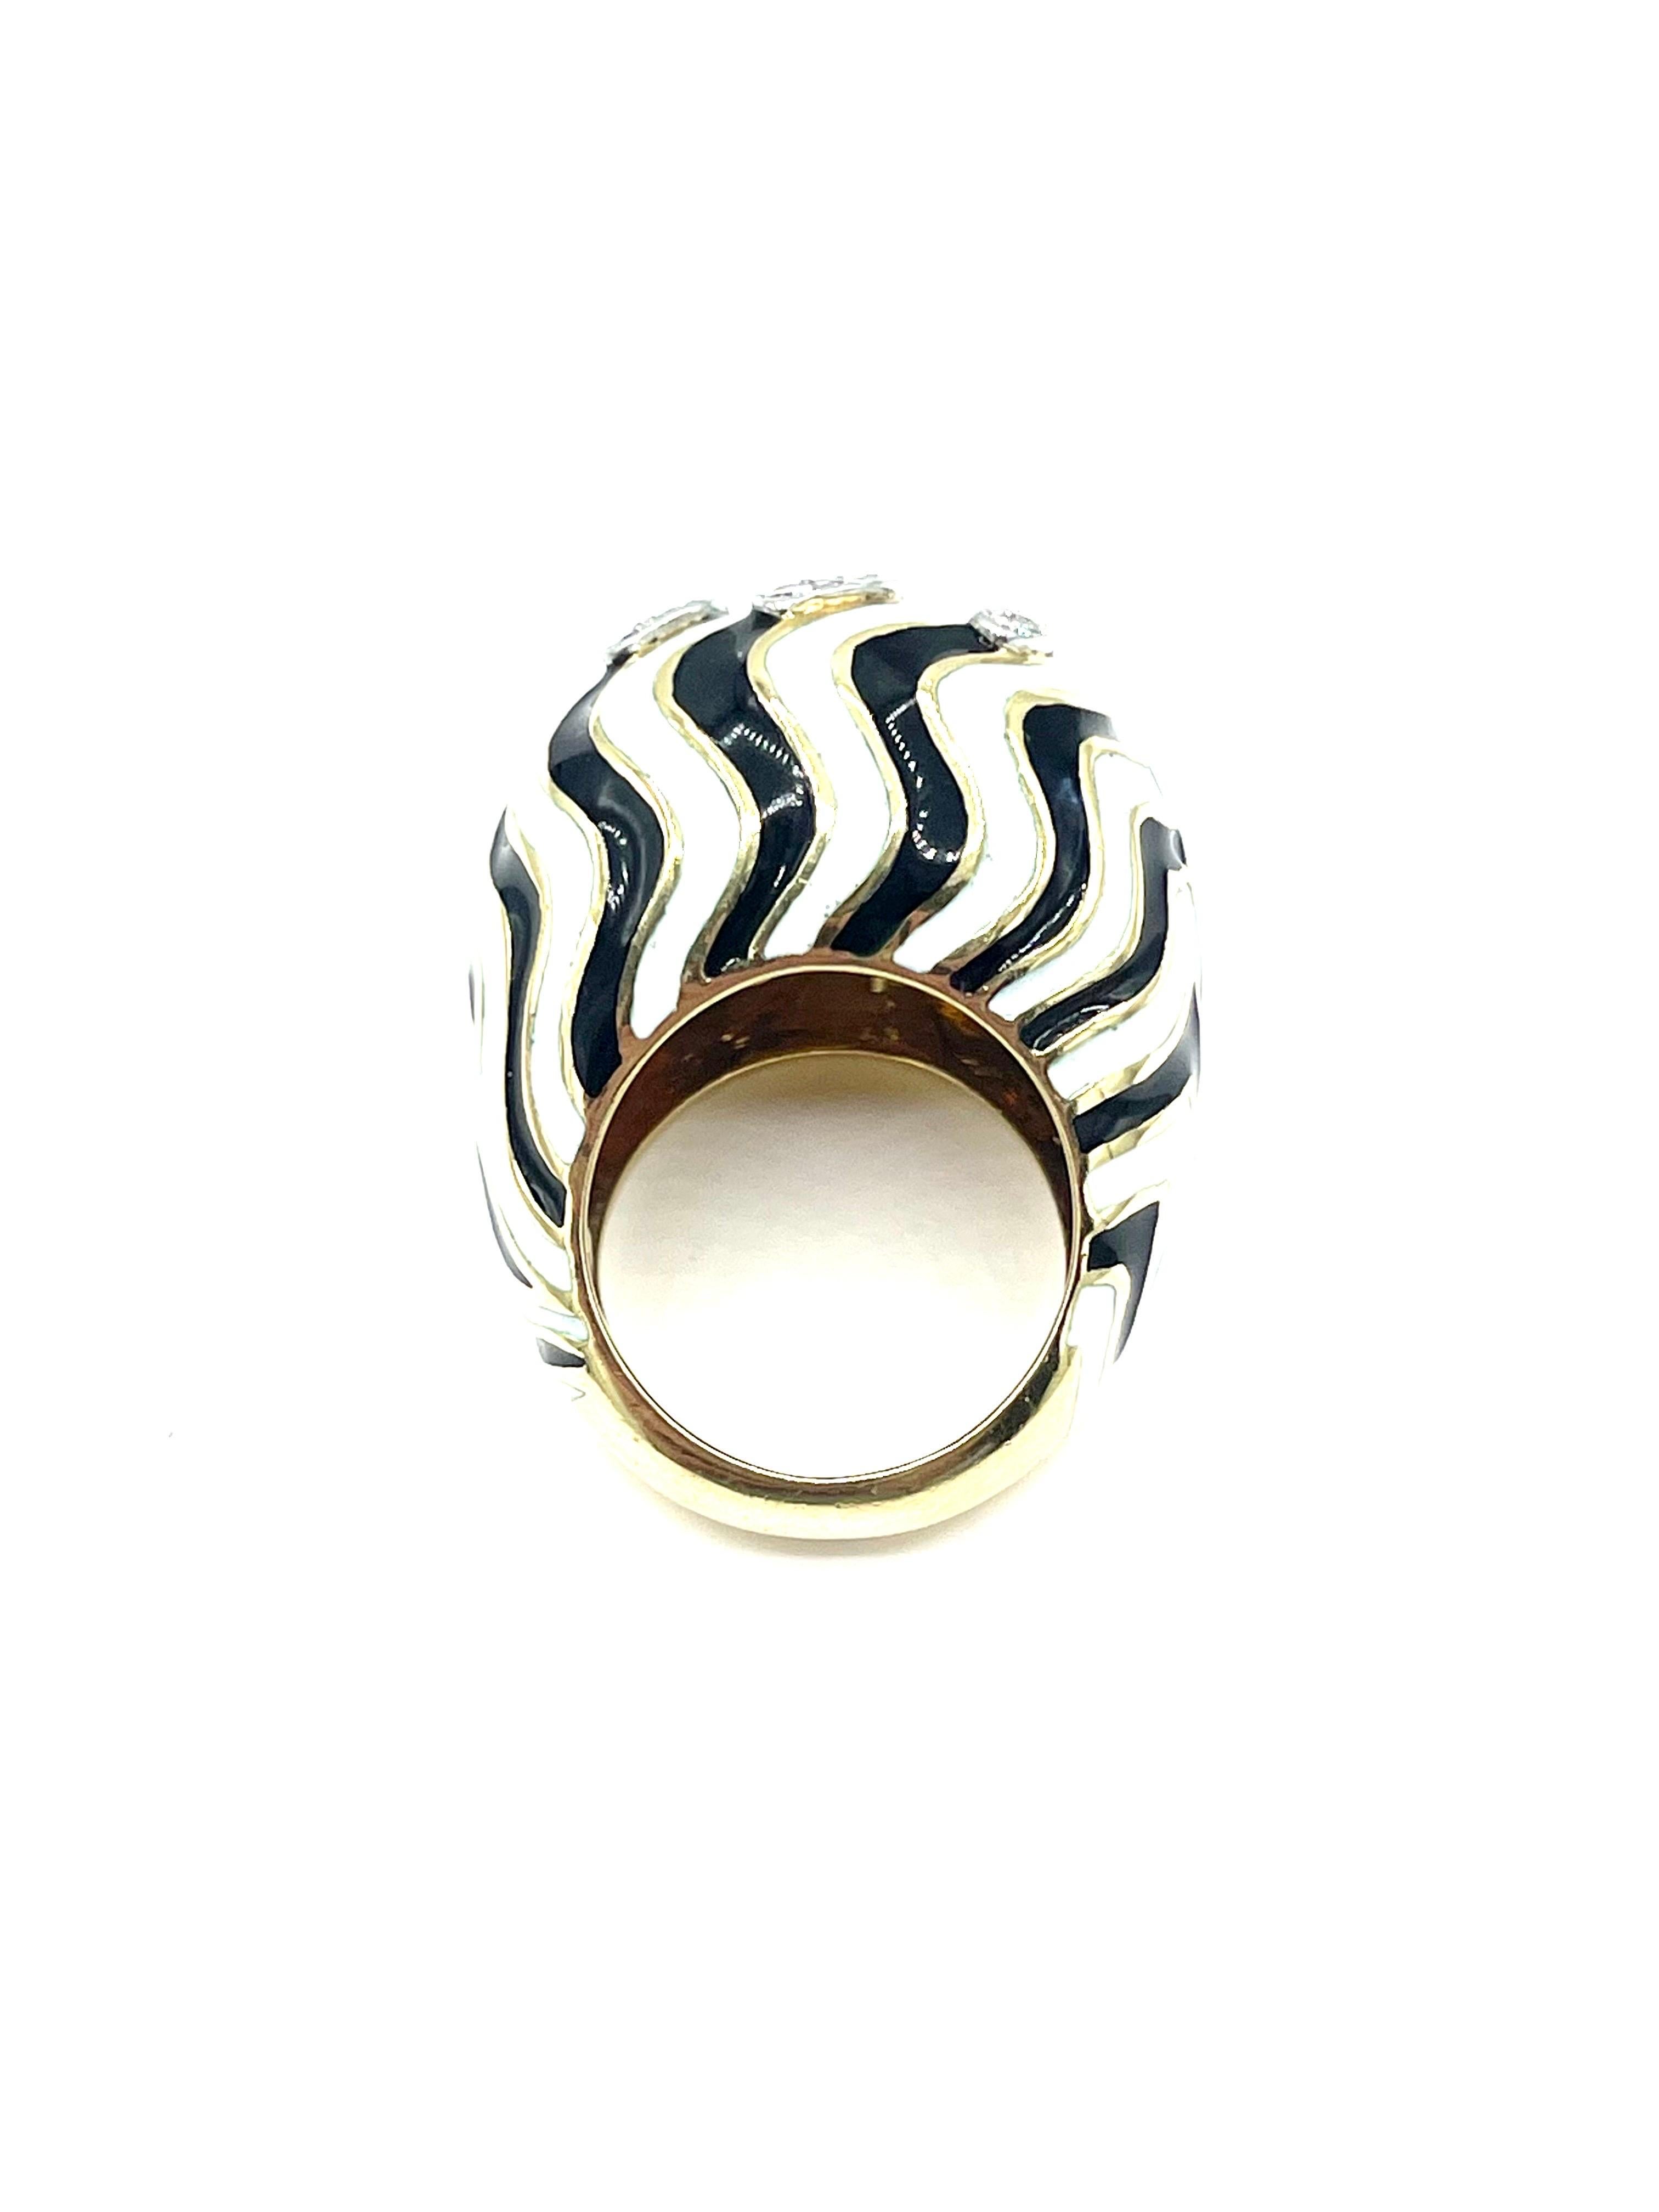 David Webb 0.50 Carat Round Brilliant Diamond and Striped Enamel Cocktail Ring In Excellent Condition For Sale In Chevy Chase, MD